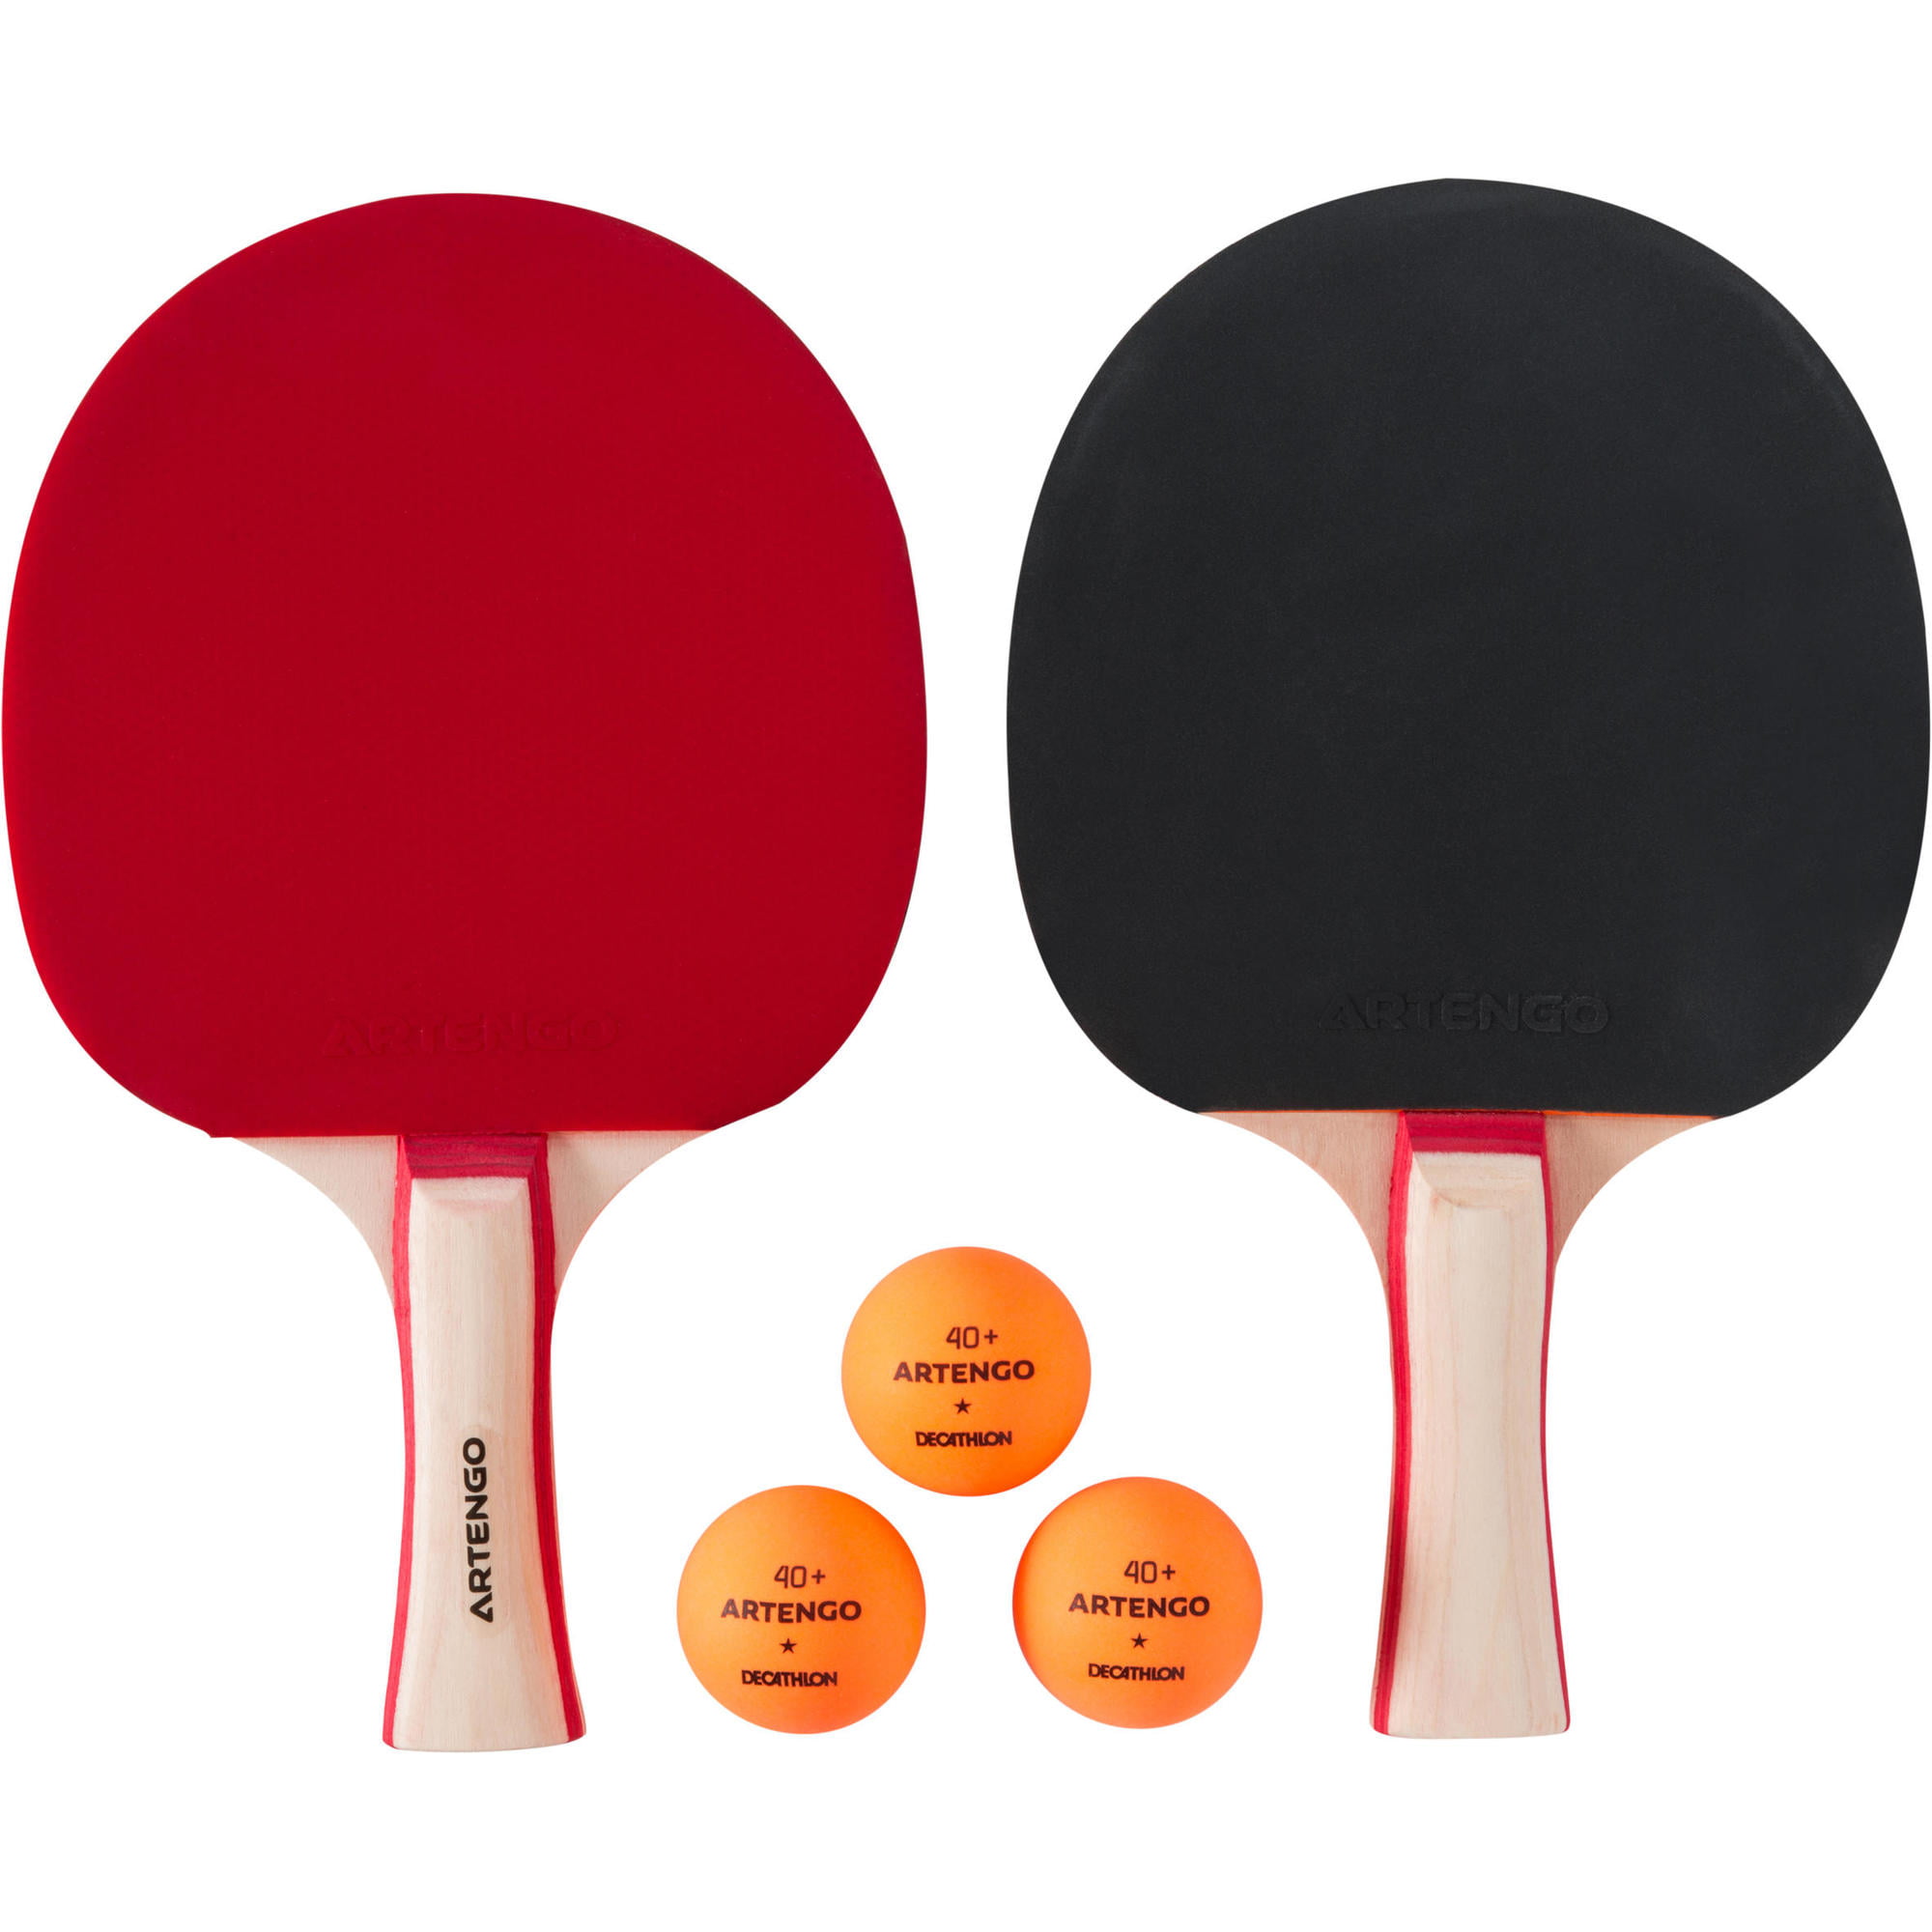 Eshan Table Tennis Set 2 Table Tennis Bats Raquets and 3 Ping Pong Balls Table Games for School Home Office Sports 